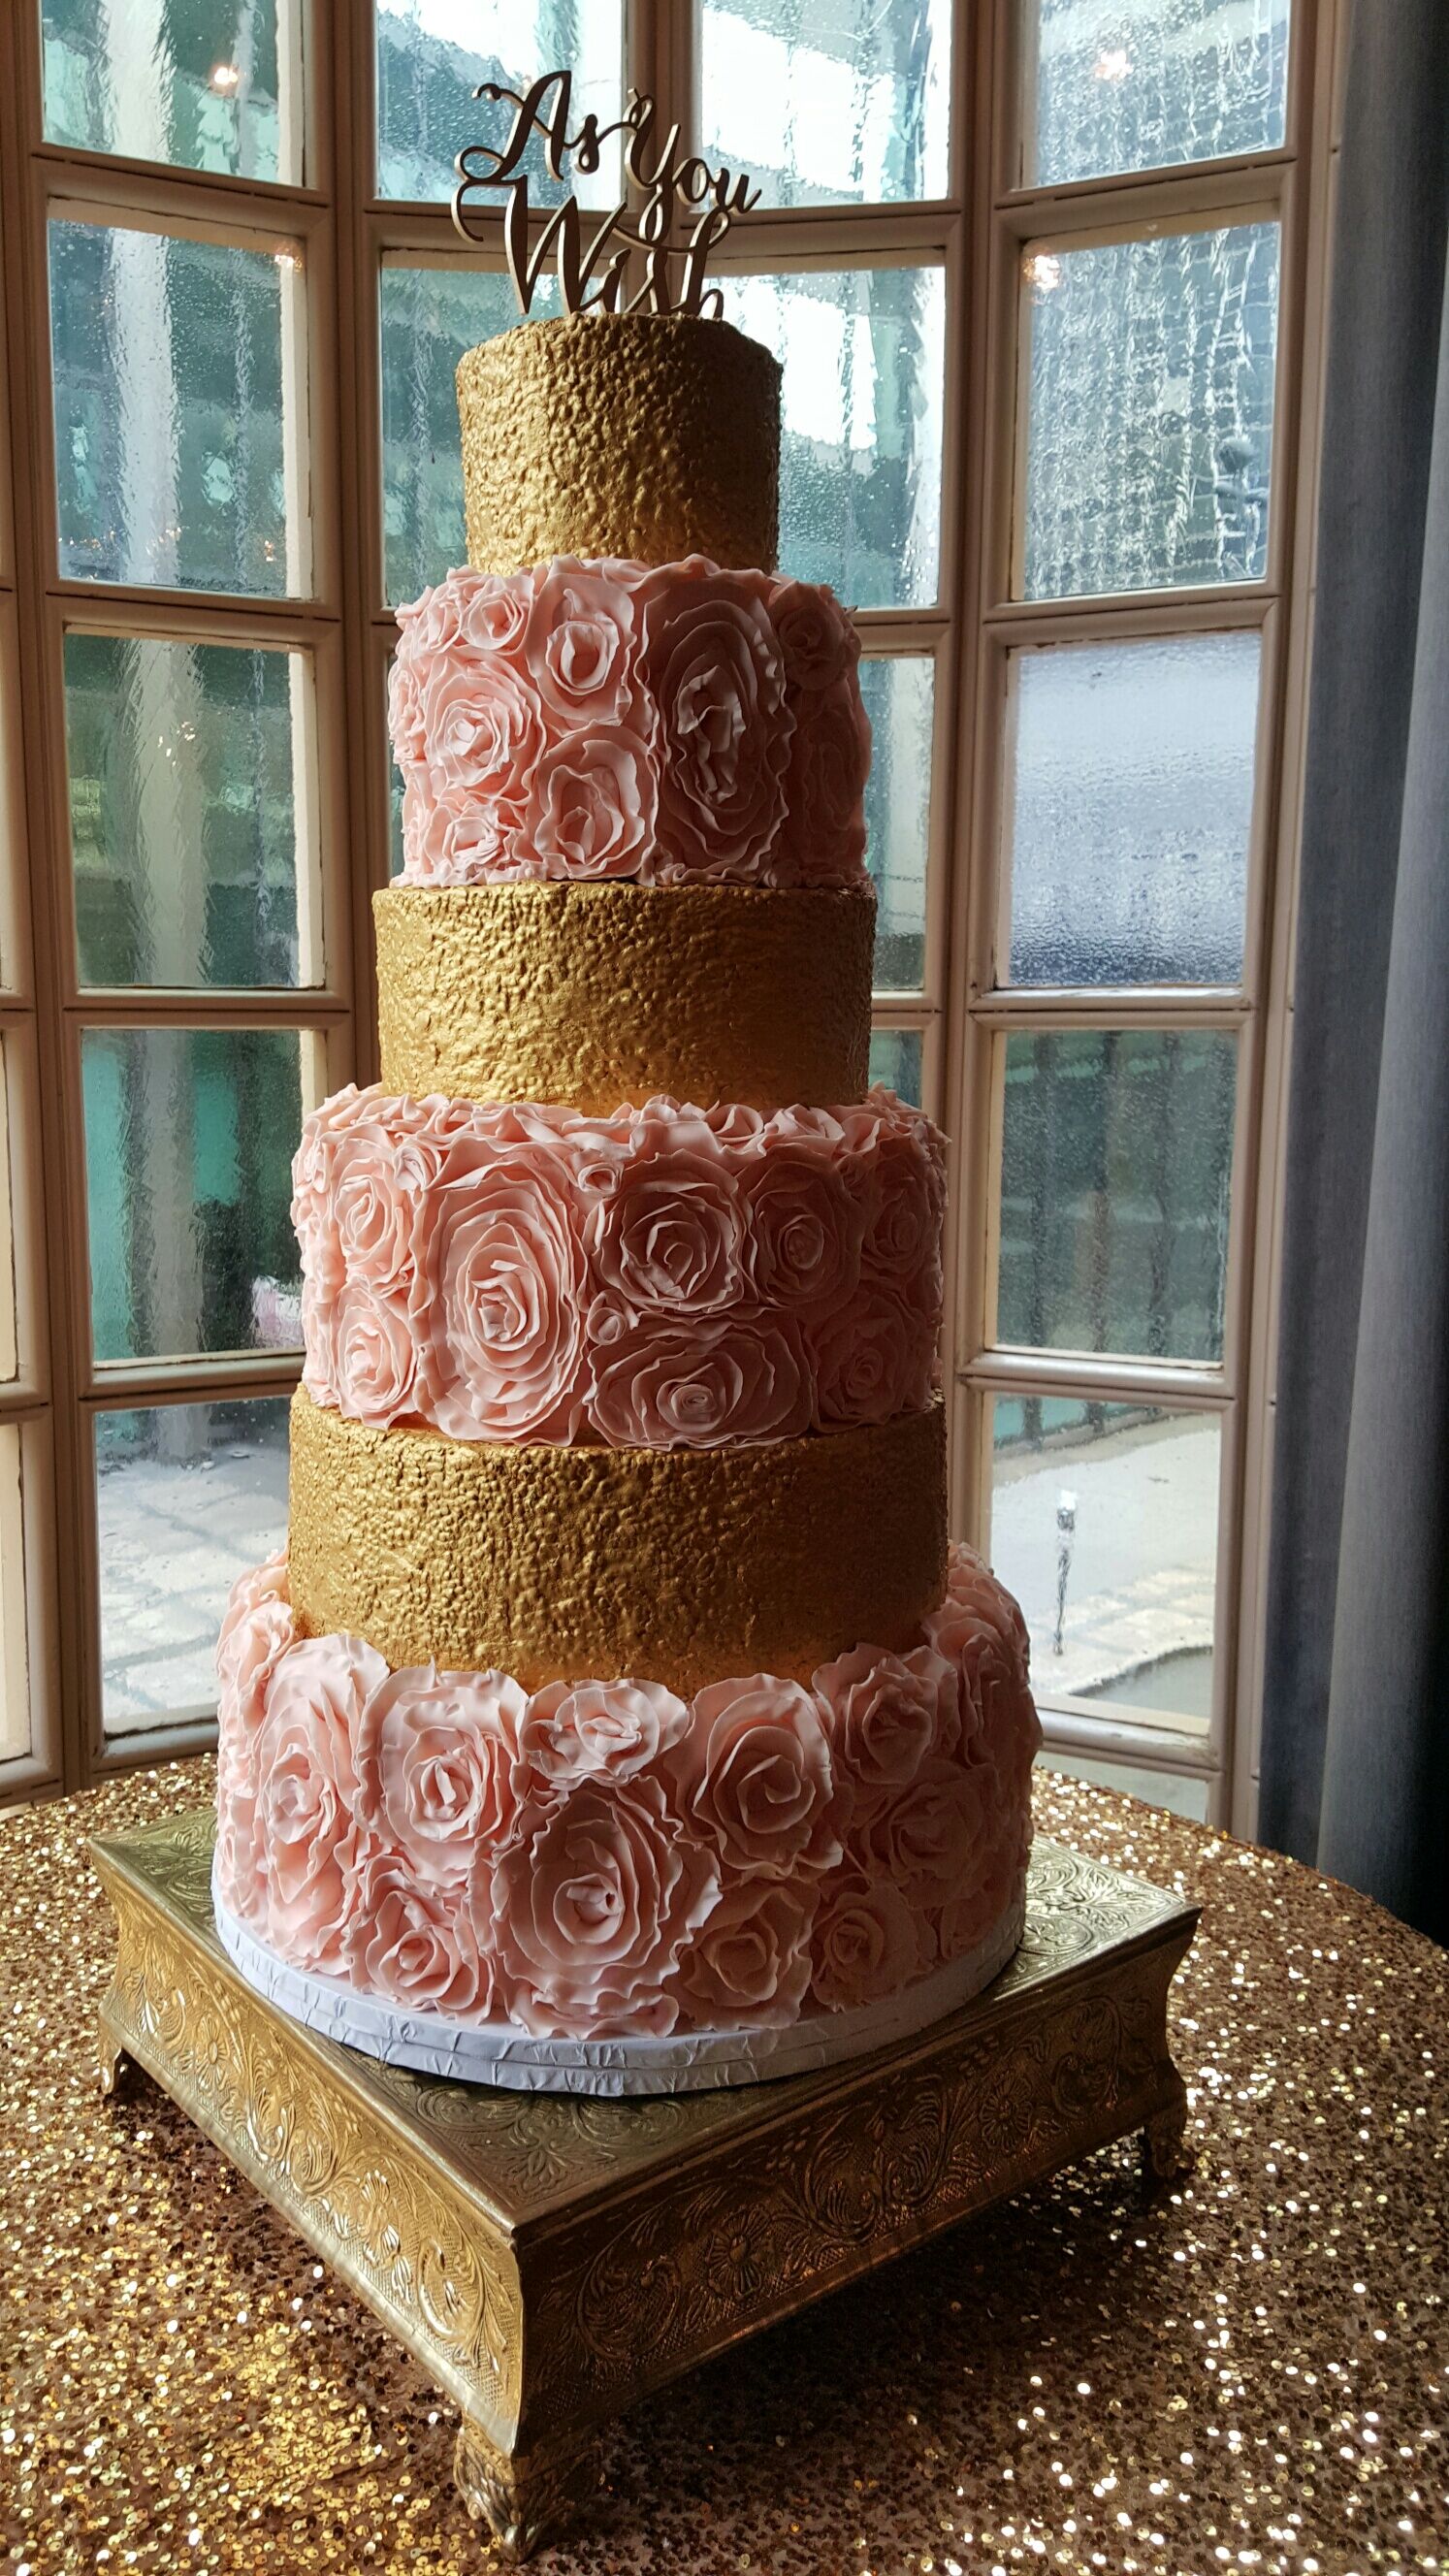 Short North Piece of Cake | Wedding Cakes - View 219 ...